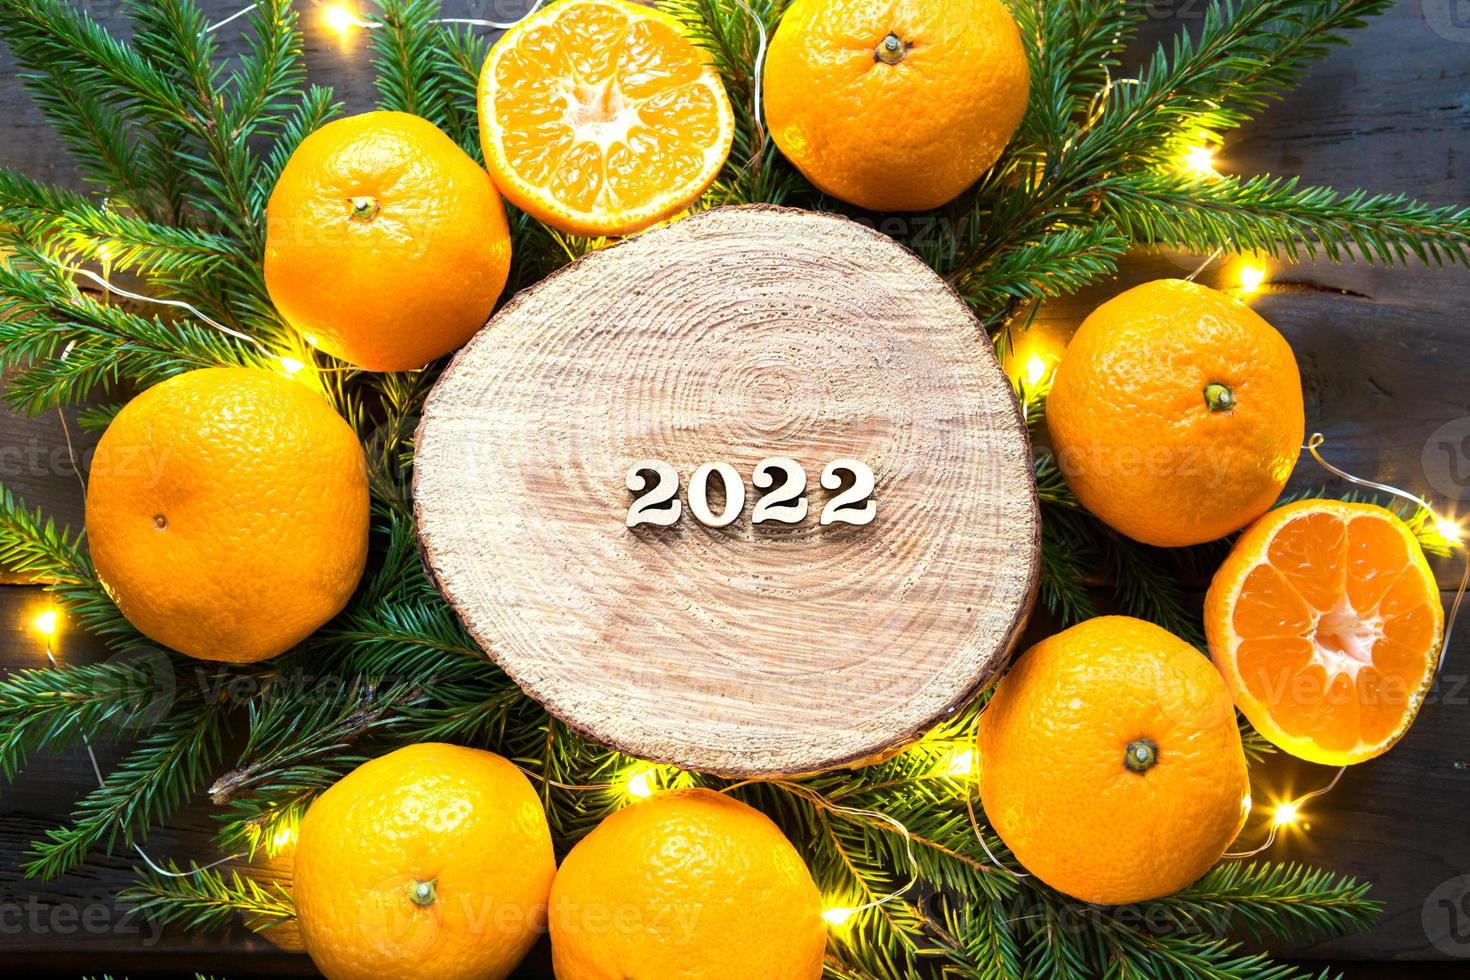 New year's holiday background on a round cut of a tree surrounded by tangerines, live fir branches and golden lights garlands, with wooden numbers date 2022. Citrus aroma, Christmas. Space for text. photo